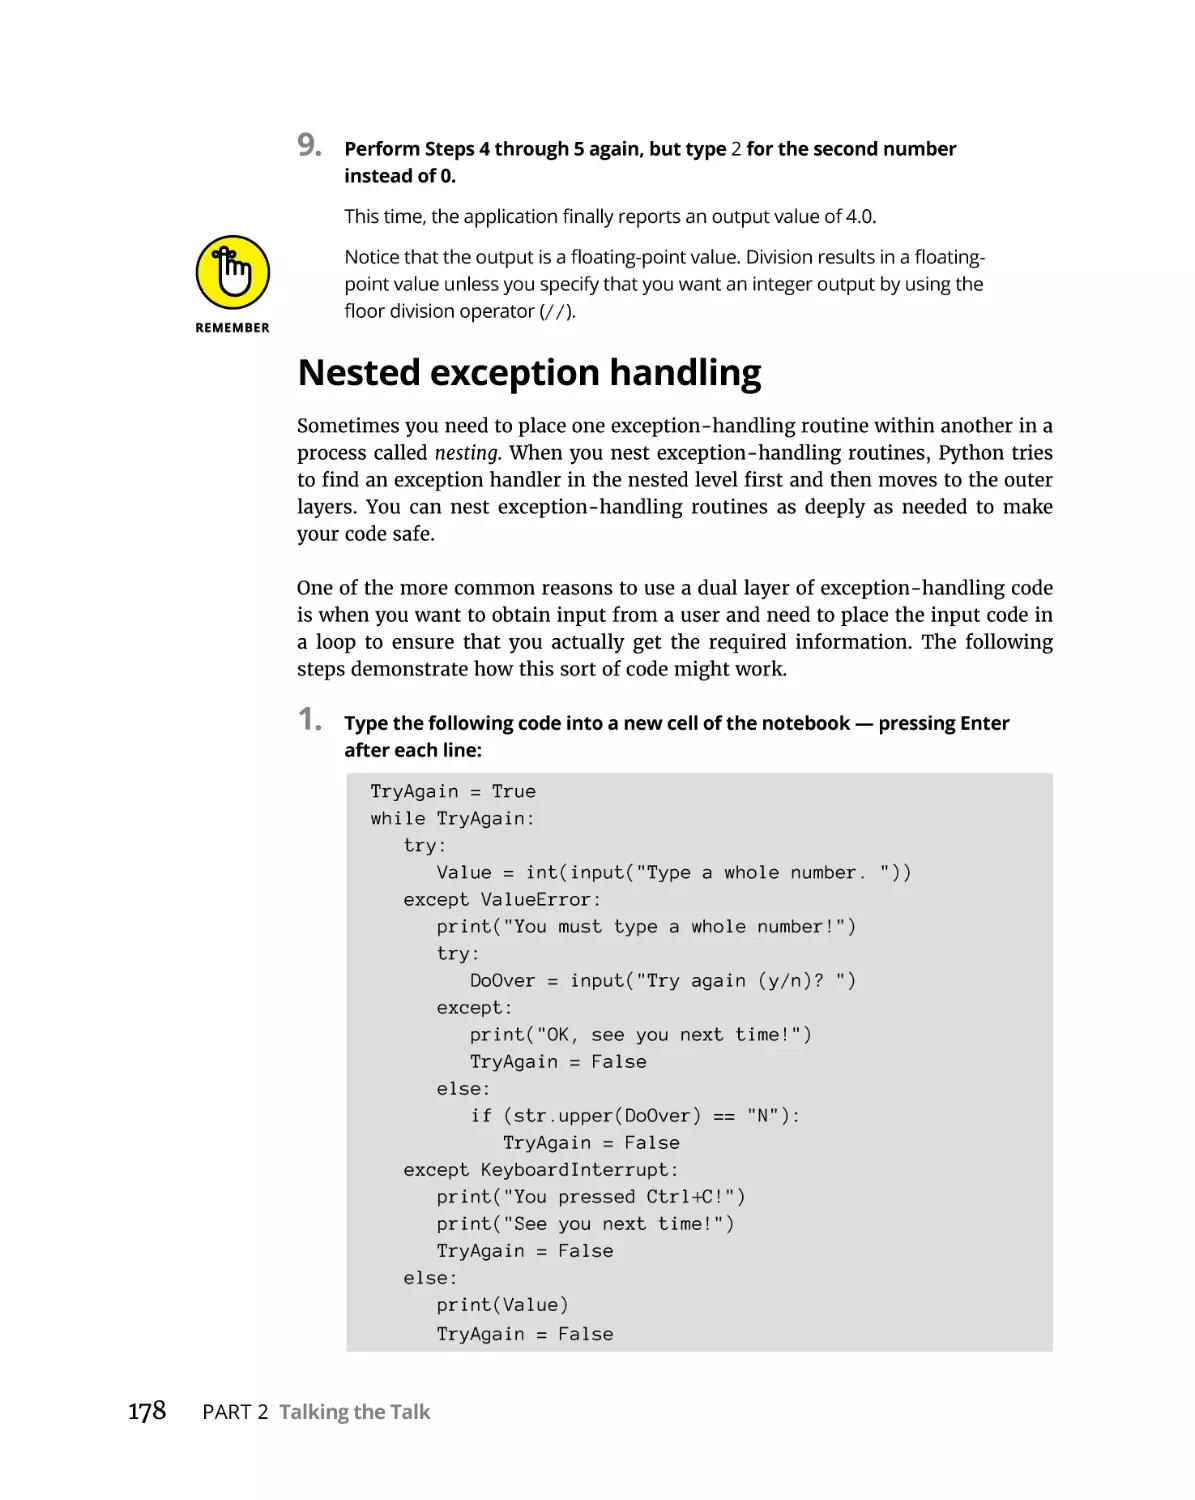 Nested exception handling